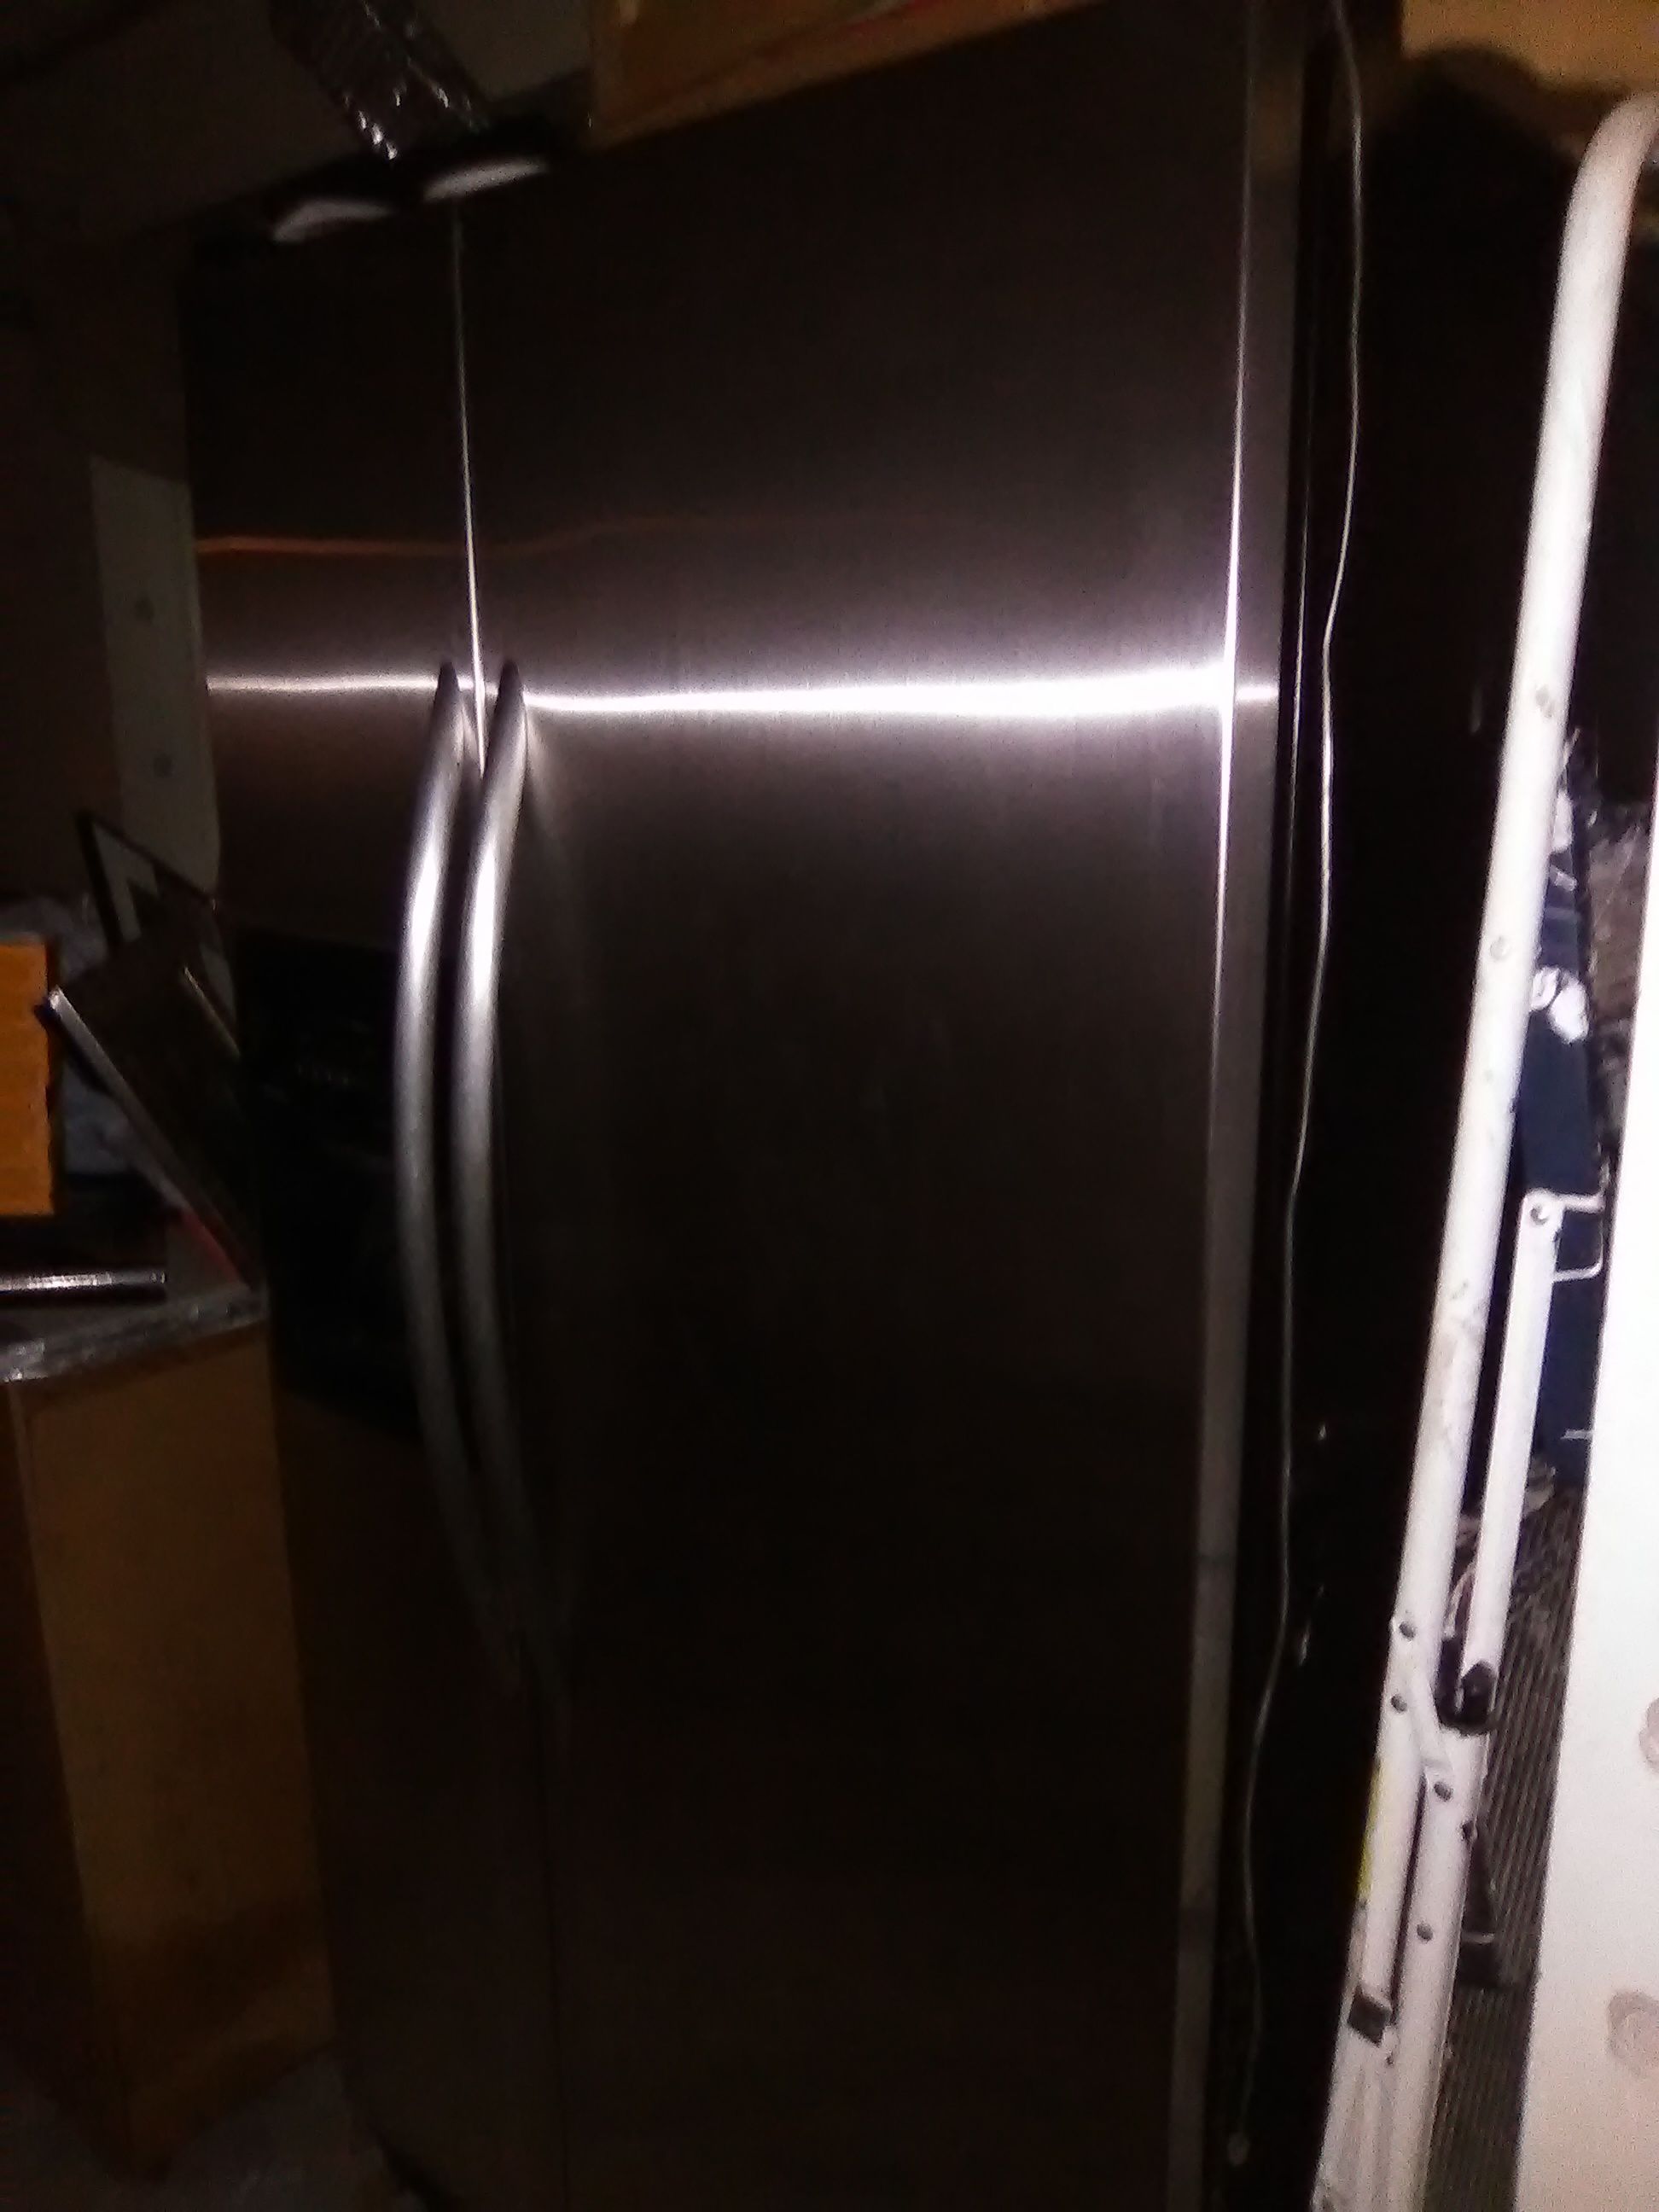 Need Stainless Steel Refrigerator? Buy One Today!